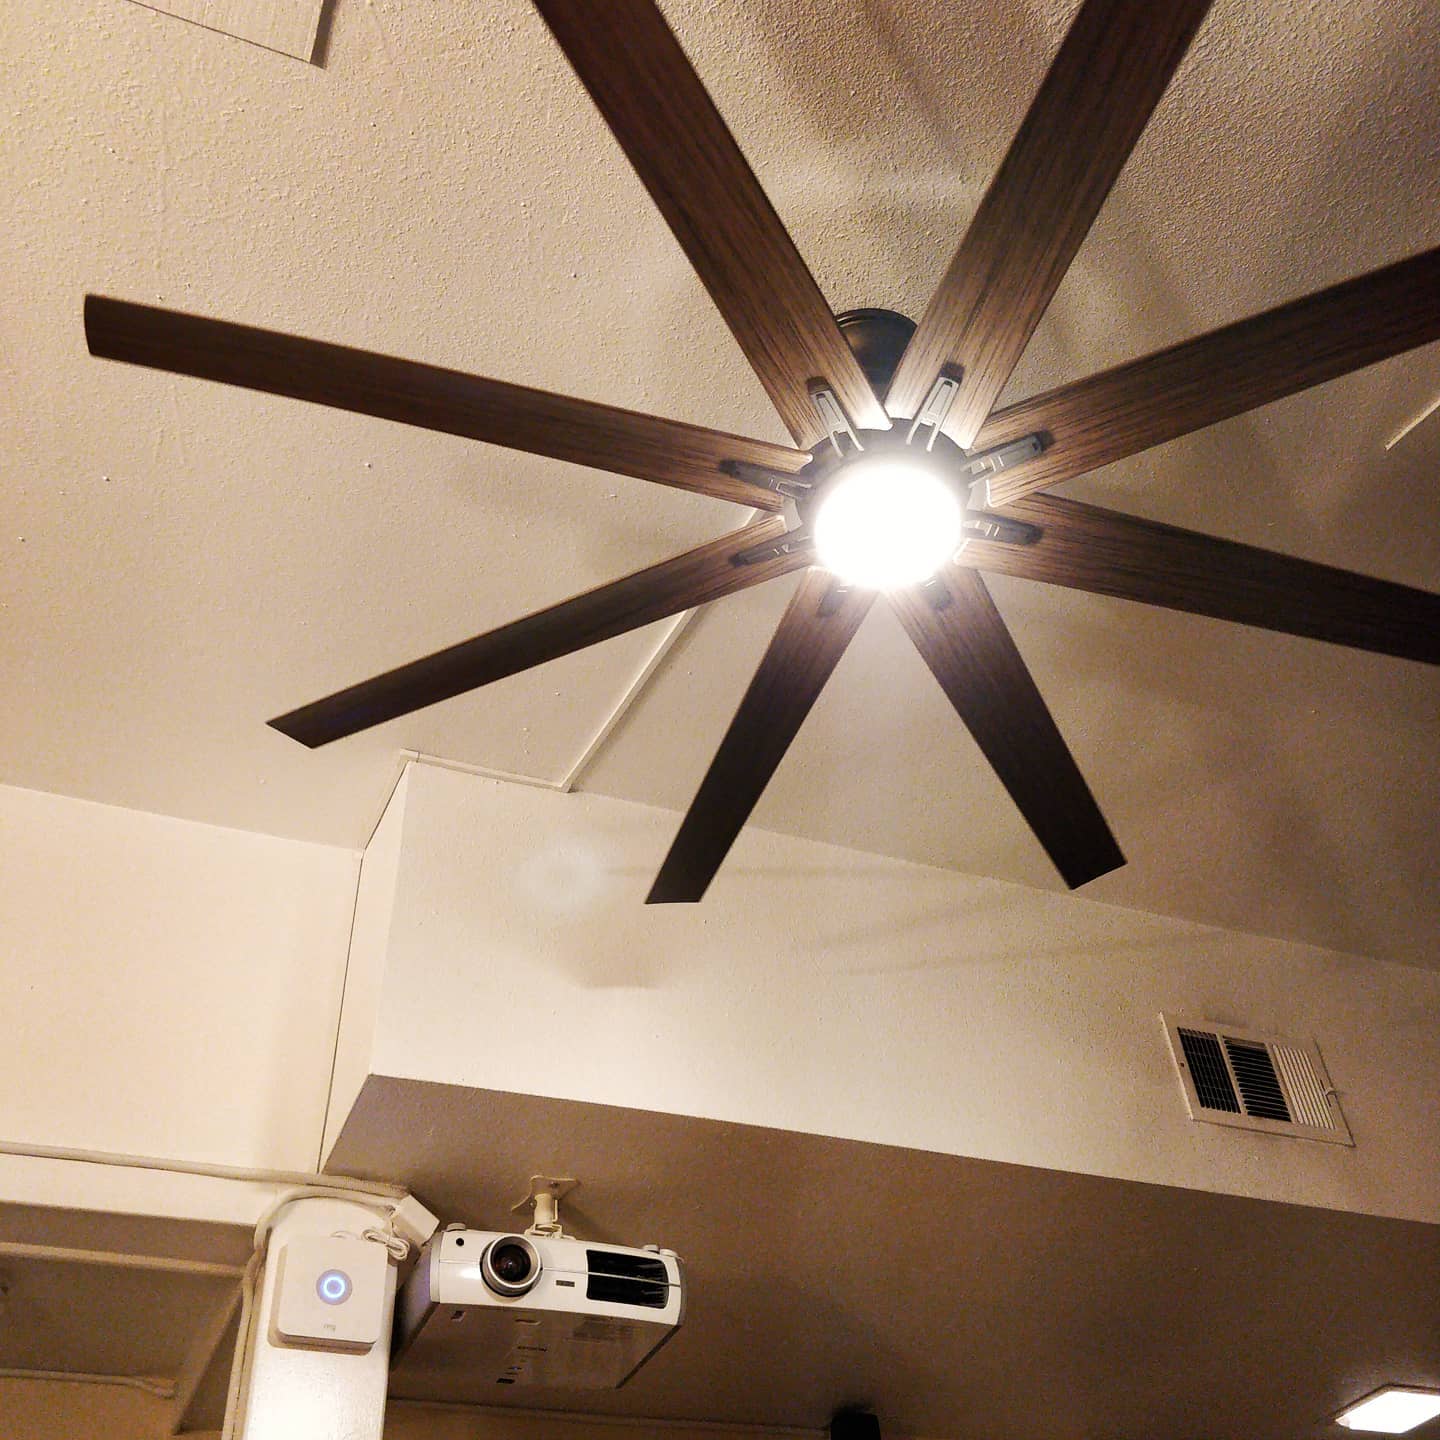 Ceiling fan with cable management. No more blue tape